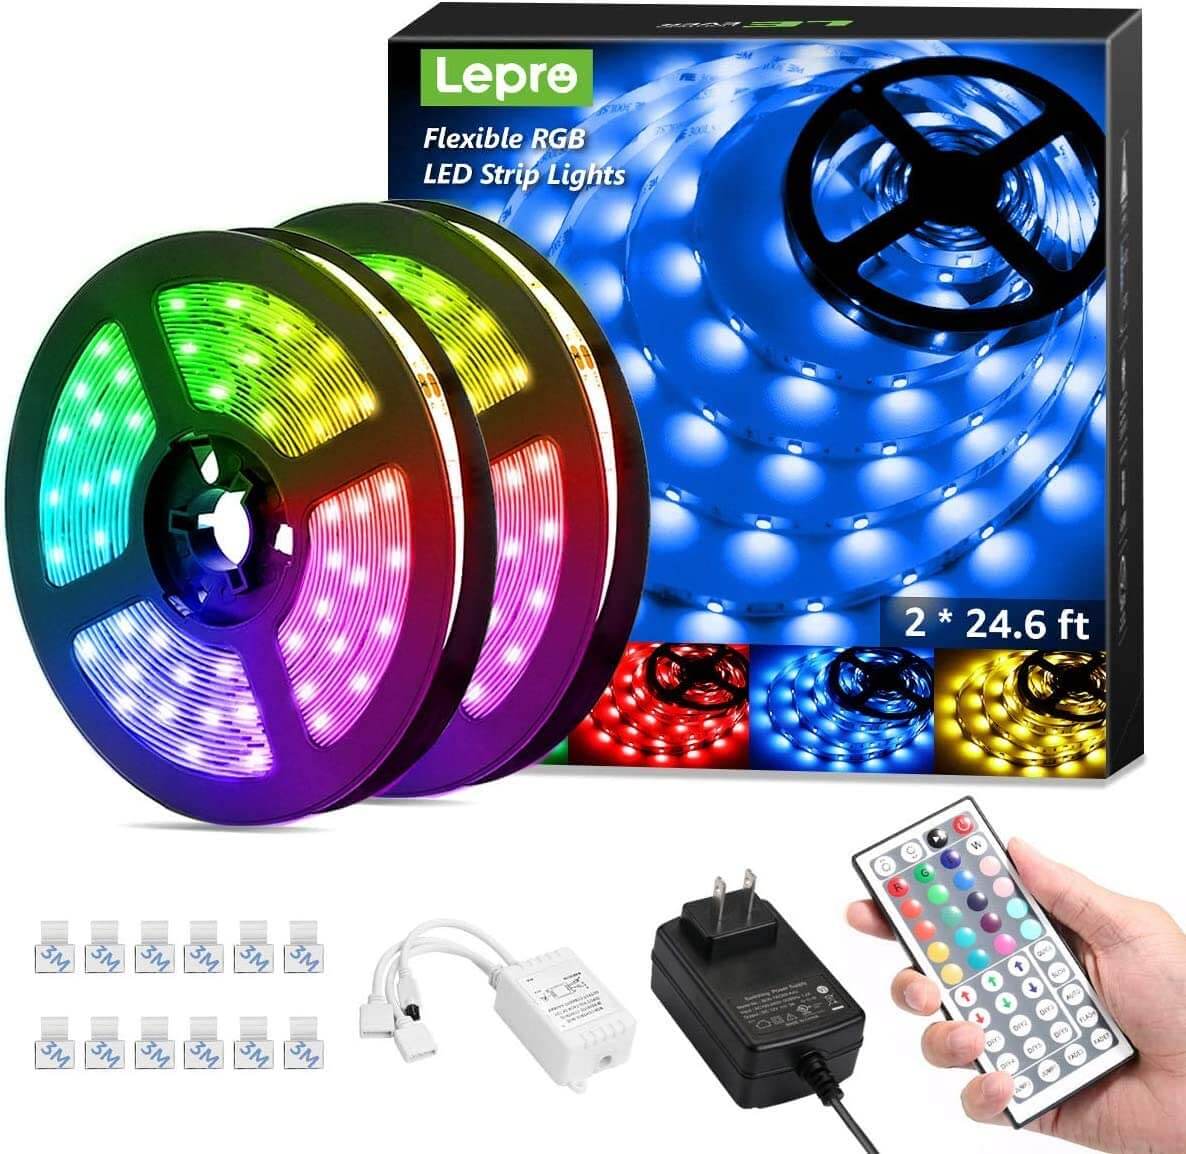 Best LED Strip For Your Project